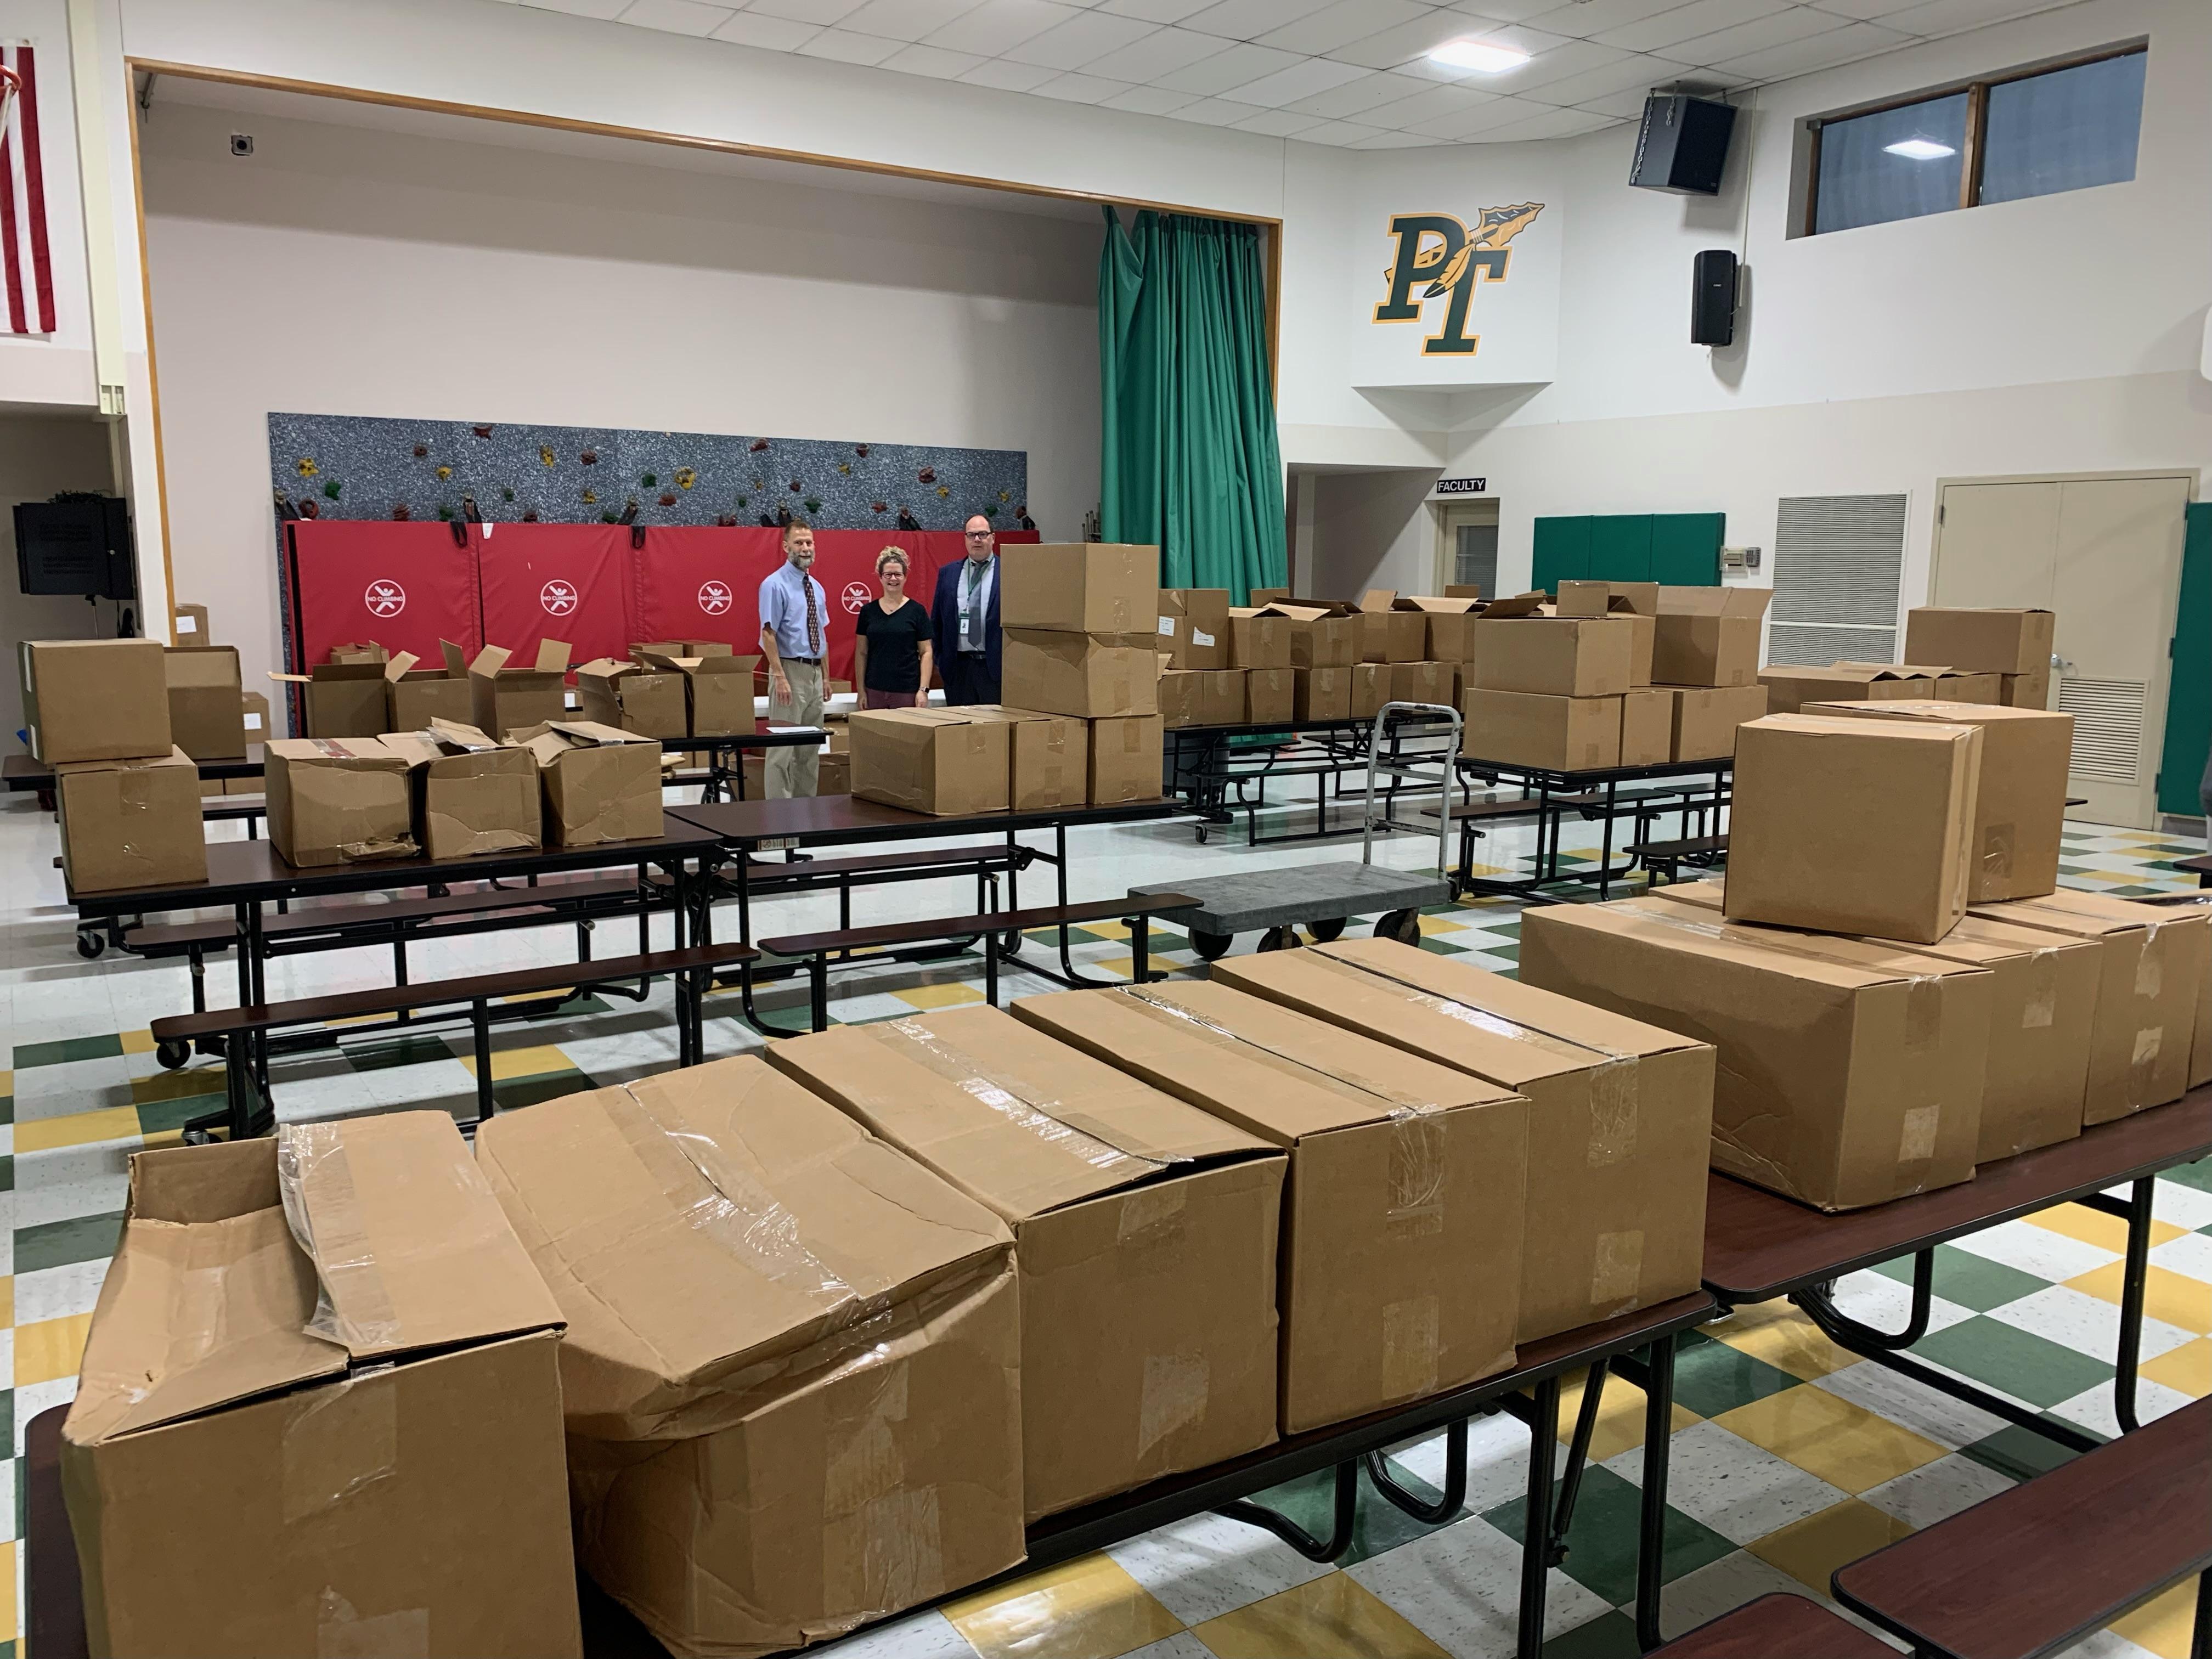 Principal Mr. Marasti, Library Aide Sarah Schadler, and Superintendent Dr. Harris stand amidst the cases of books earned by McCullough students